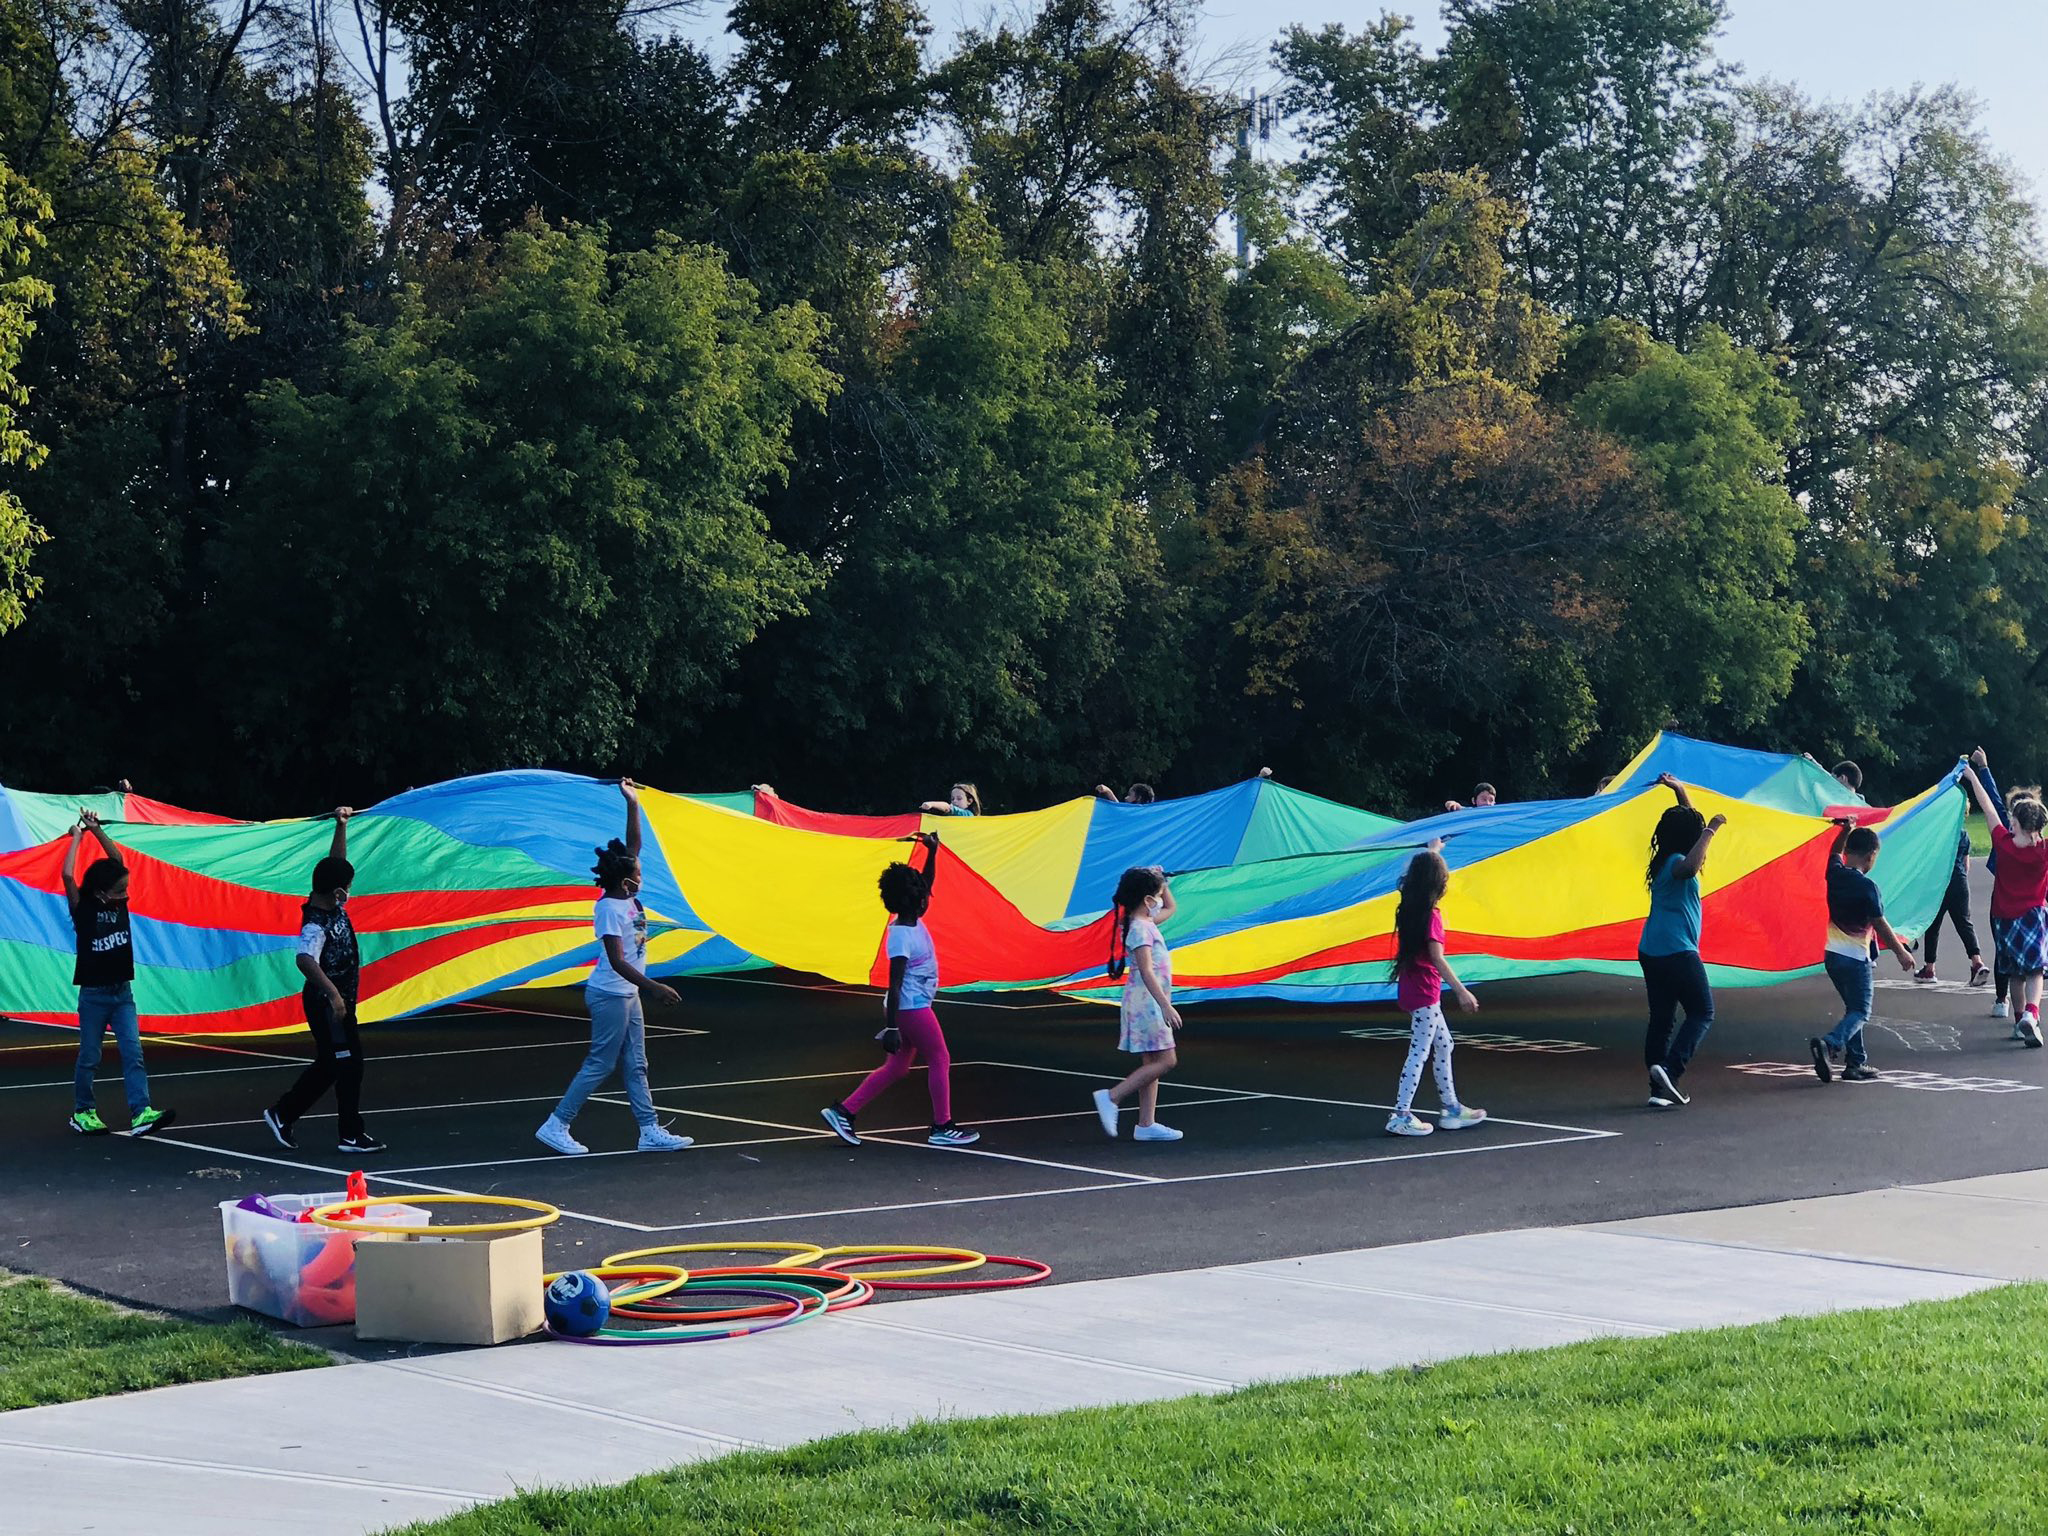 Students playing with a parachute in gym class